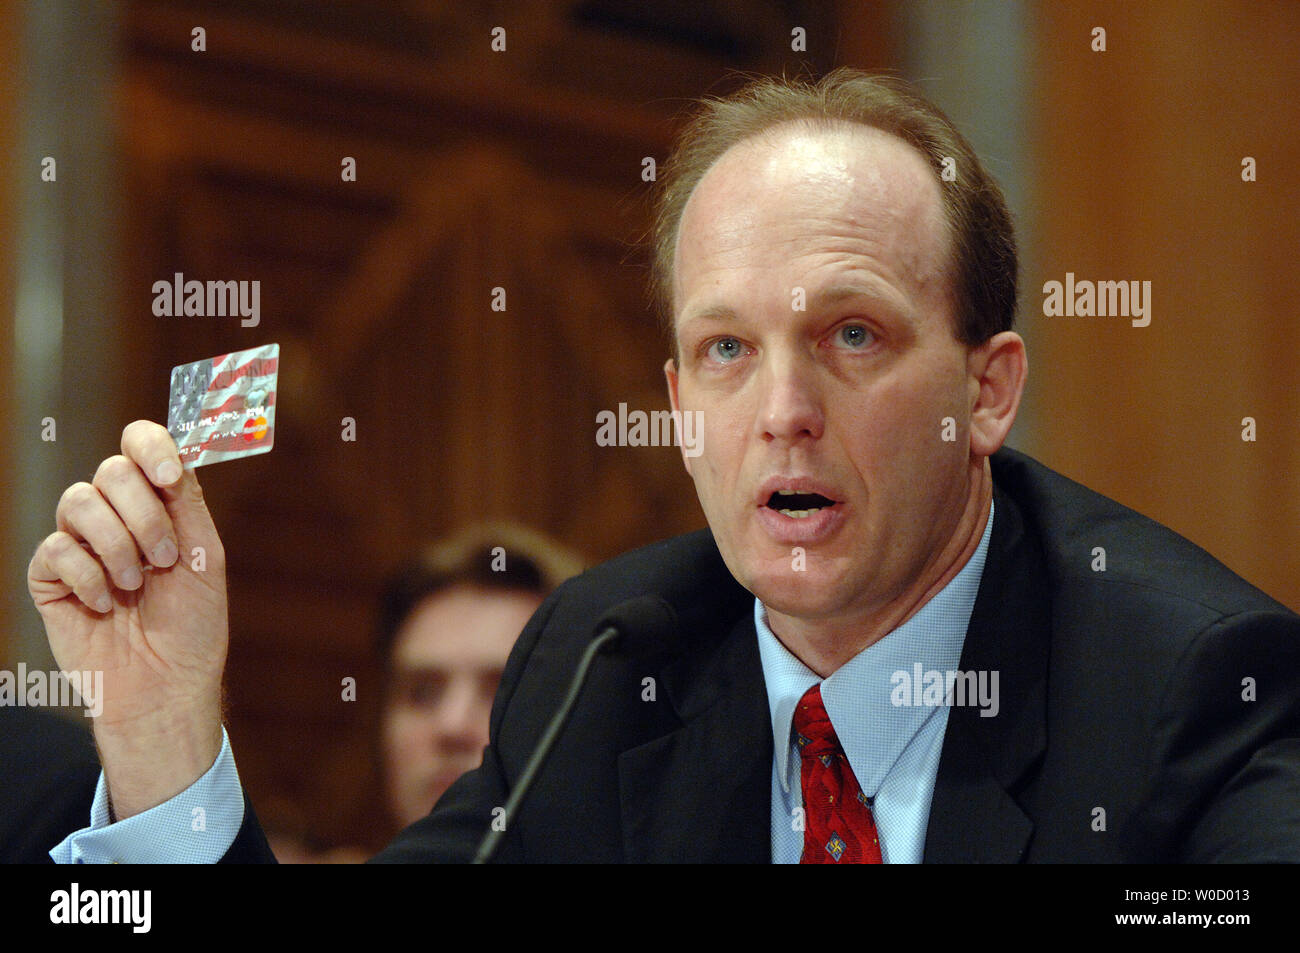 Gregory Kutz, managing director of forensic audits and special investigations, Government Accountability Office, holds up an ATM card like those given to hurricane victims as he testifies before the Senate Homeland Security and Governmental Affairs Committee about the waste and fraud generated in the aftermath of Hurricane Katrinta during a hearing on Capitol Hill in Washington on February 13, 2006. Witnesses described millions of dollars in fraudulent emergency payments and waste generated by poor oversight and planning by FEMA.   (UPI Photo/Roger L. Wollenberg) Stock Photo